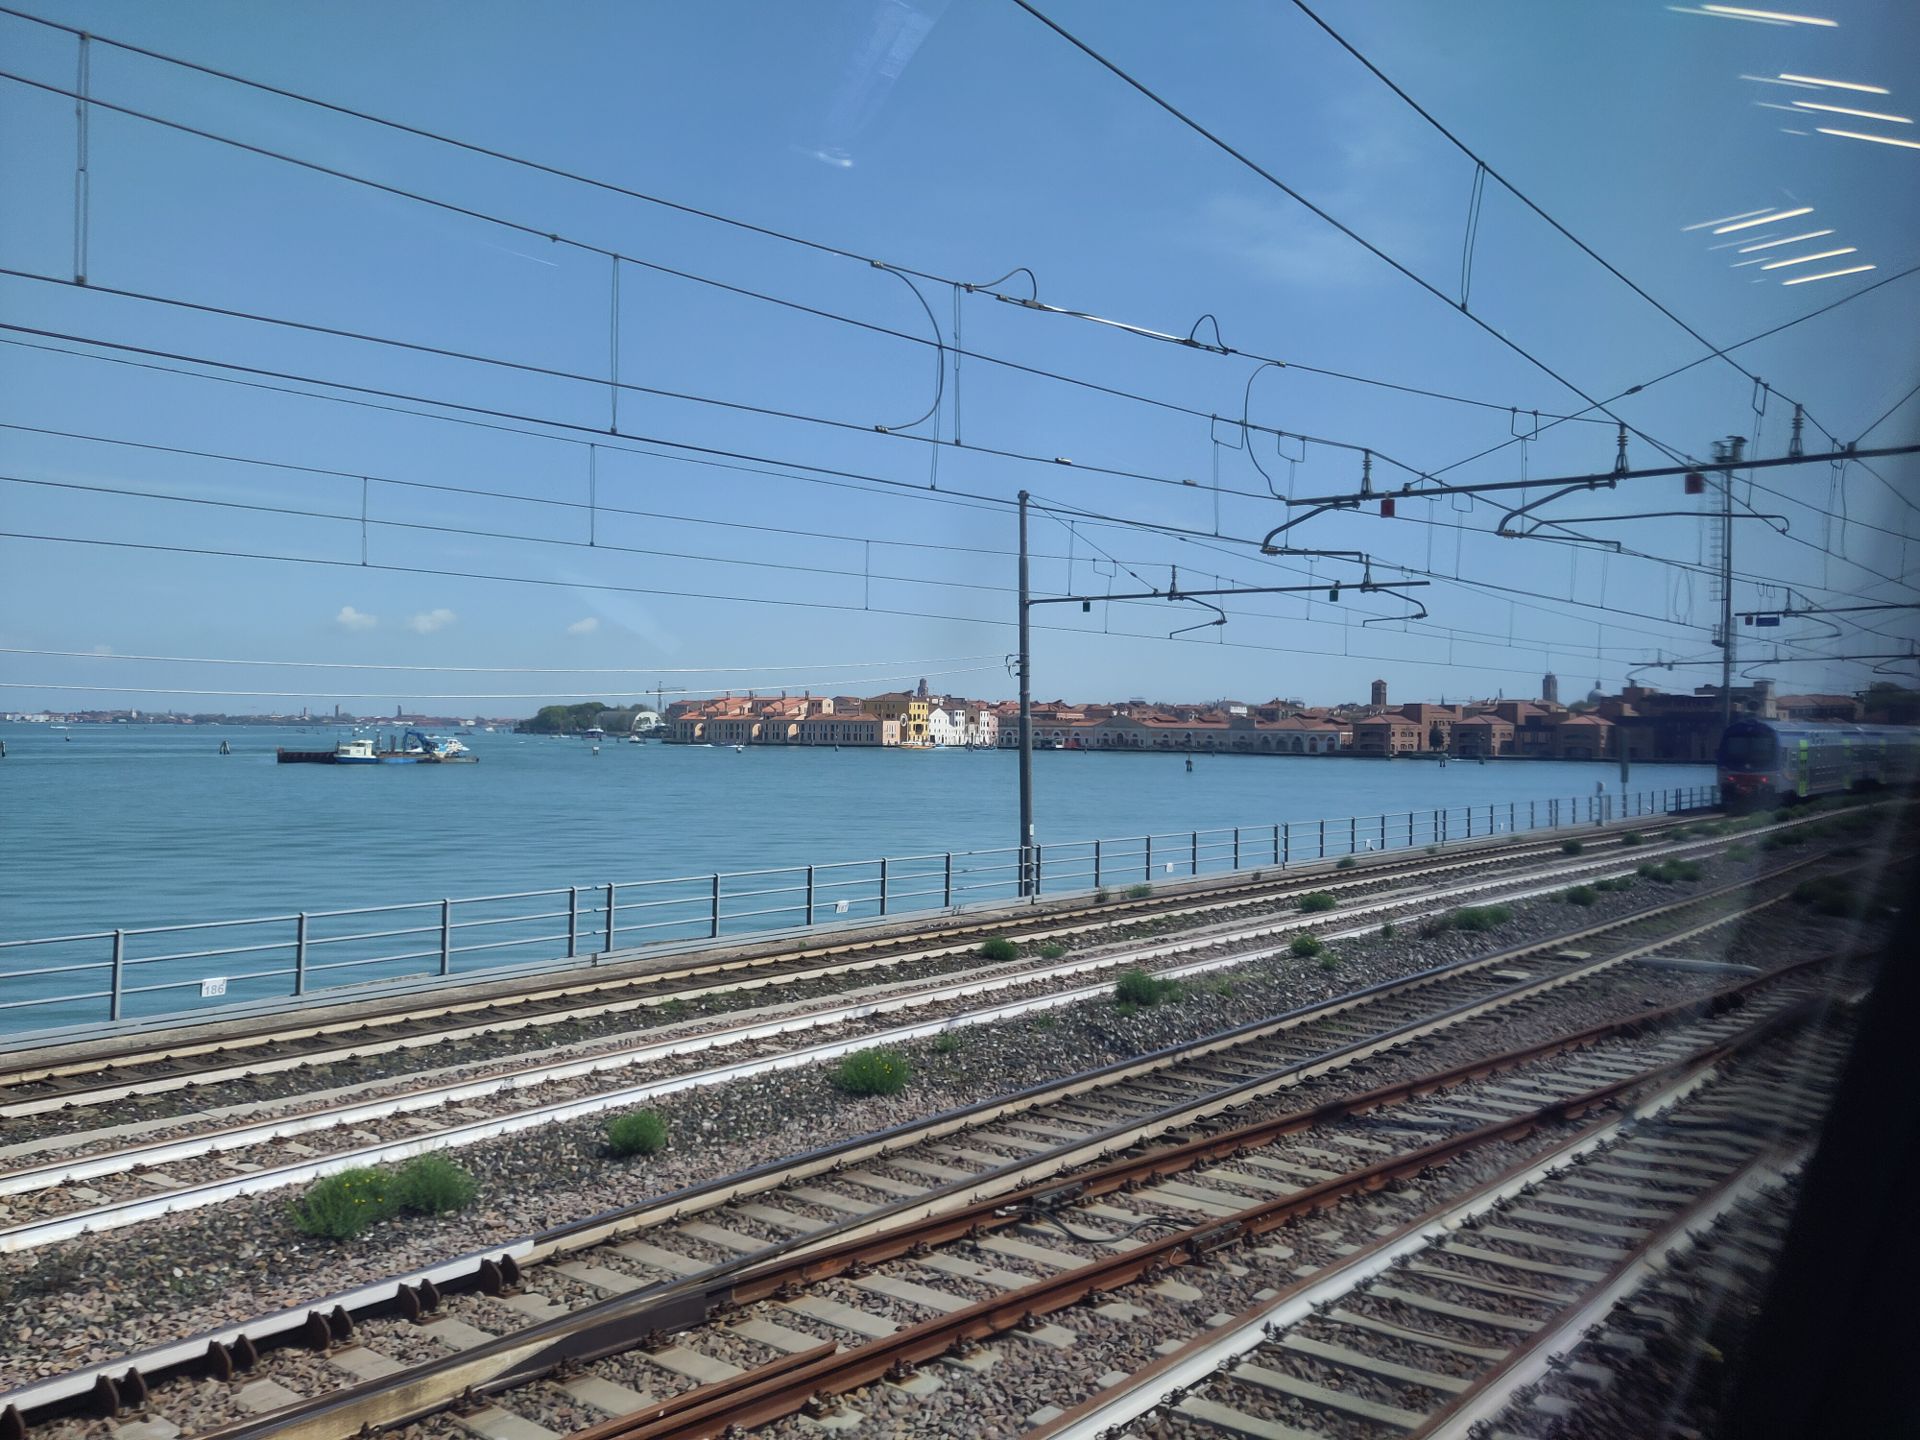 Venice laguna when coming by train, with the tracks close to me and buildings far away on the shore.